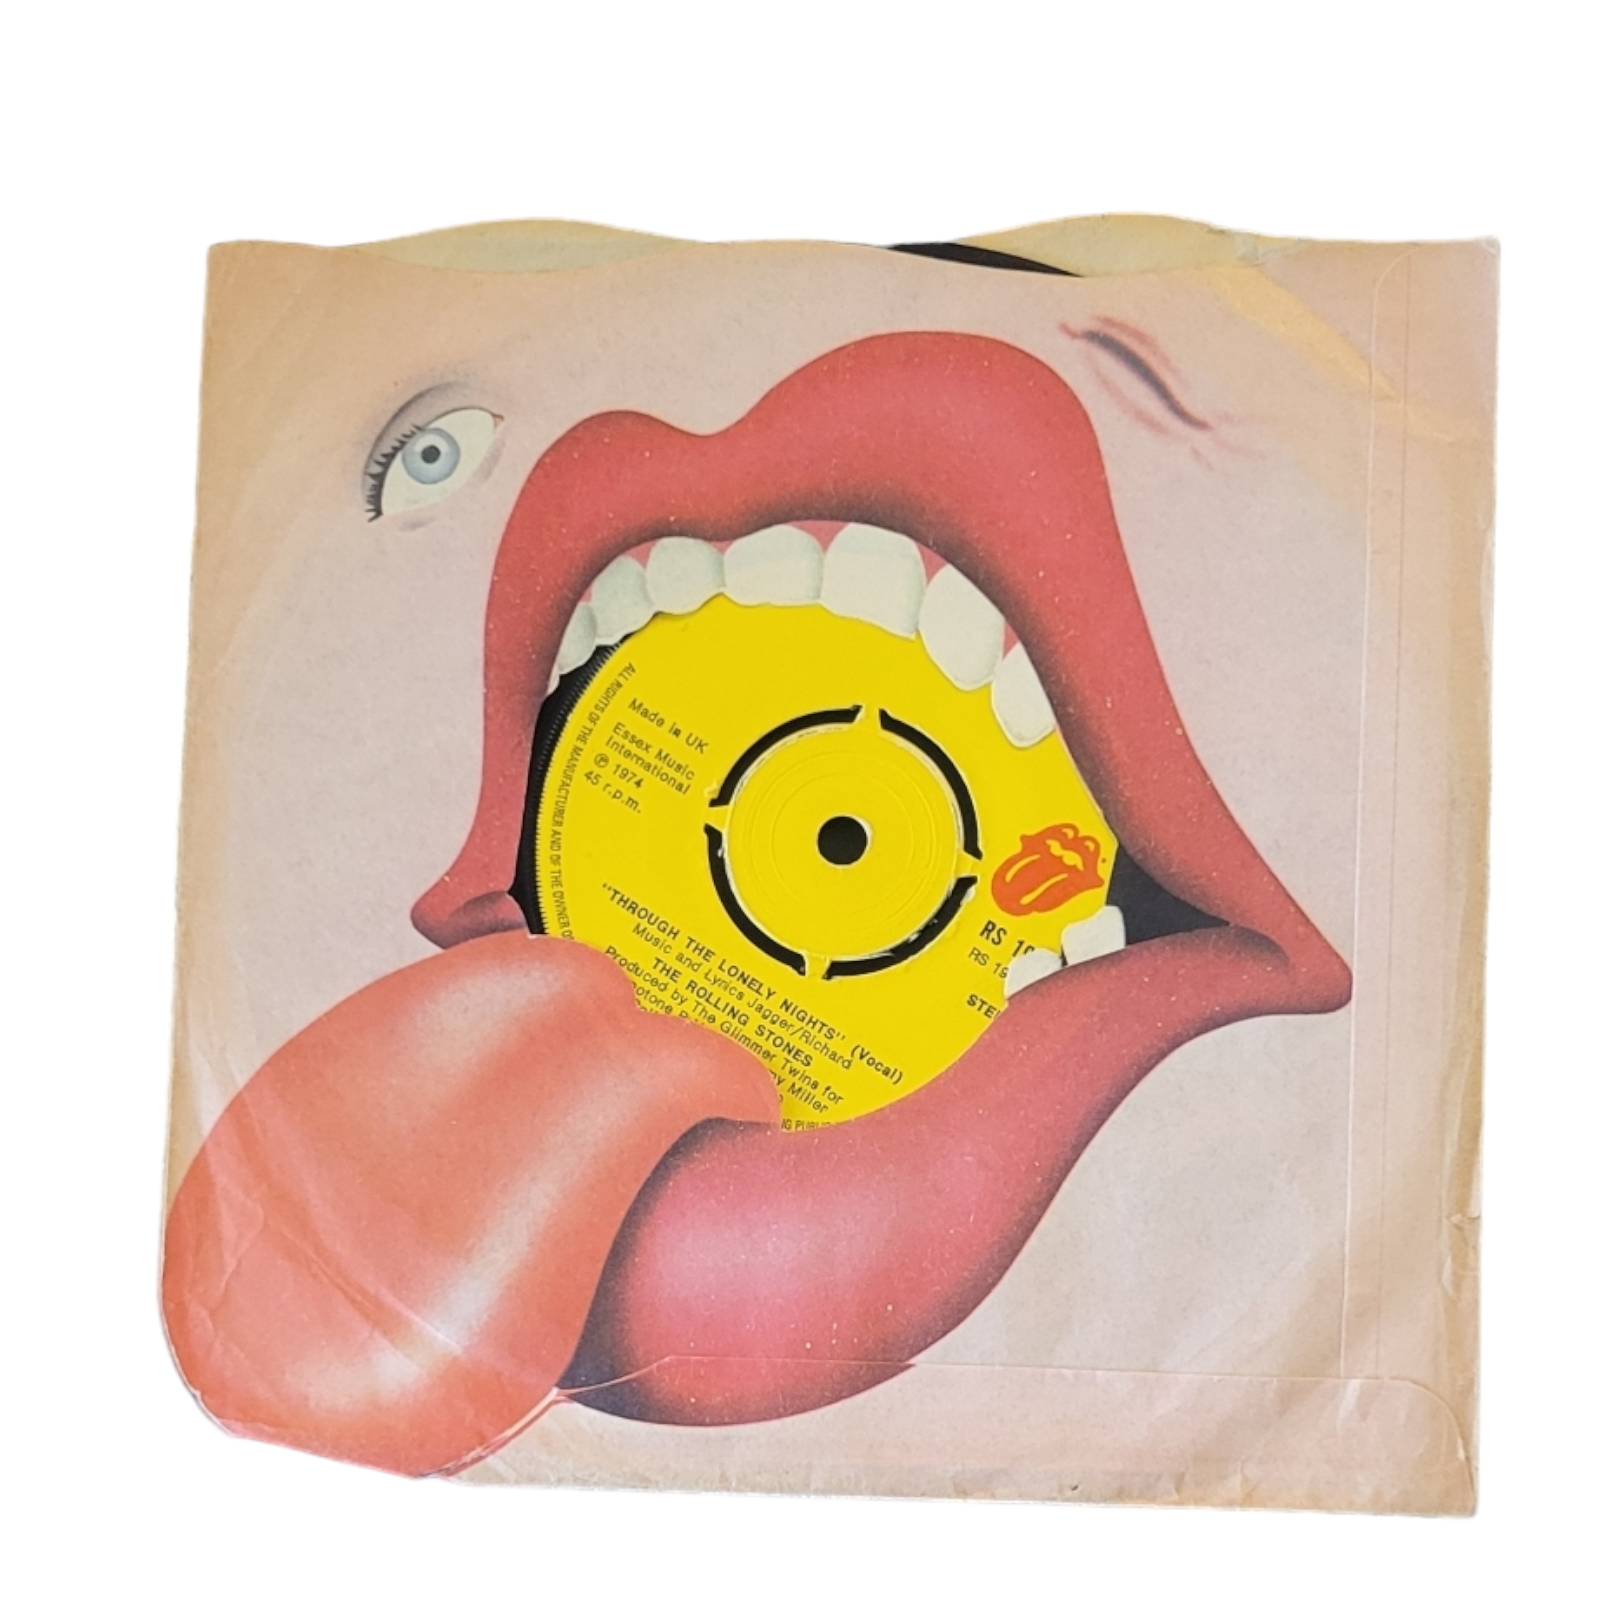 THE ROLLING STONES, A FOLDER OF SIXTEEN 7” VINYL SINGLES Including Honky Tonk Women, Undercover of - Image 2 of 4